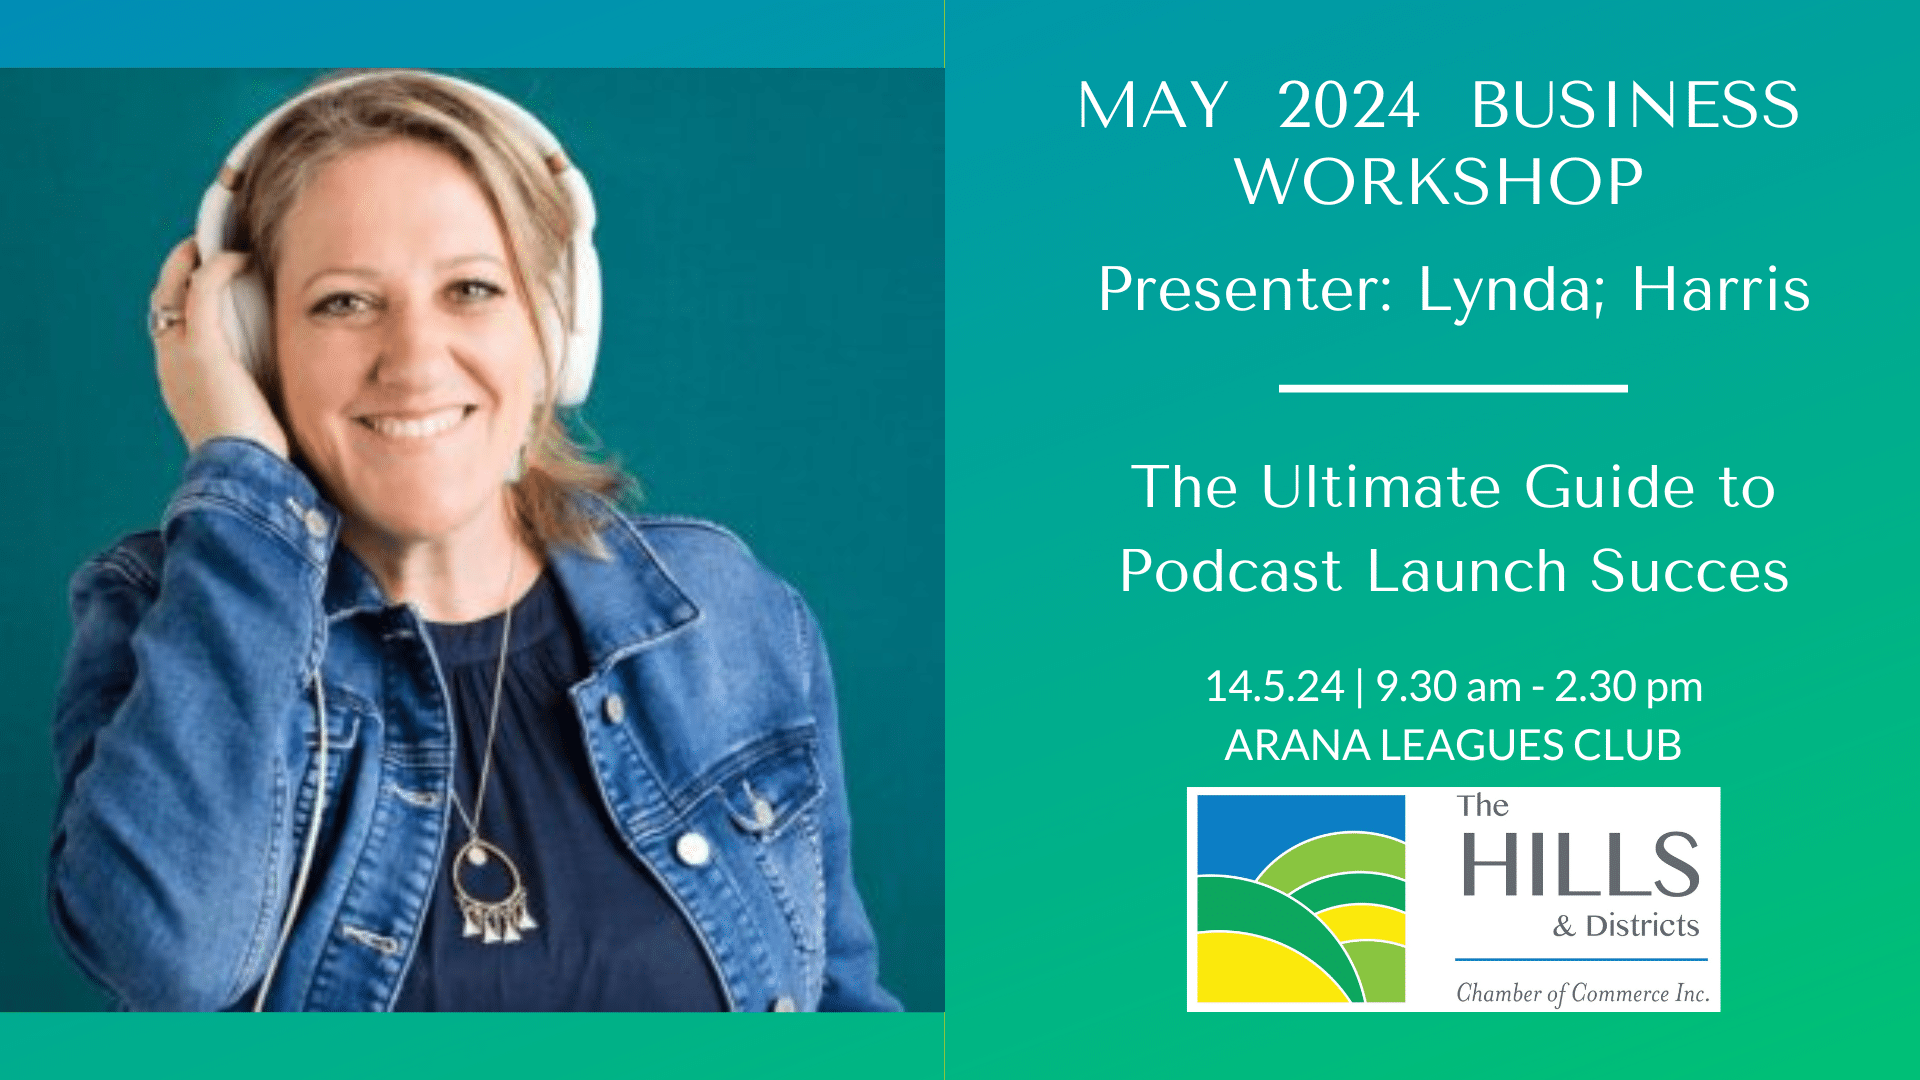 Business Development » The Ultimate Guide to Podcast Launch Success – May 2024 Business Workshop Series